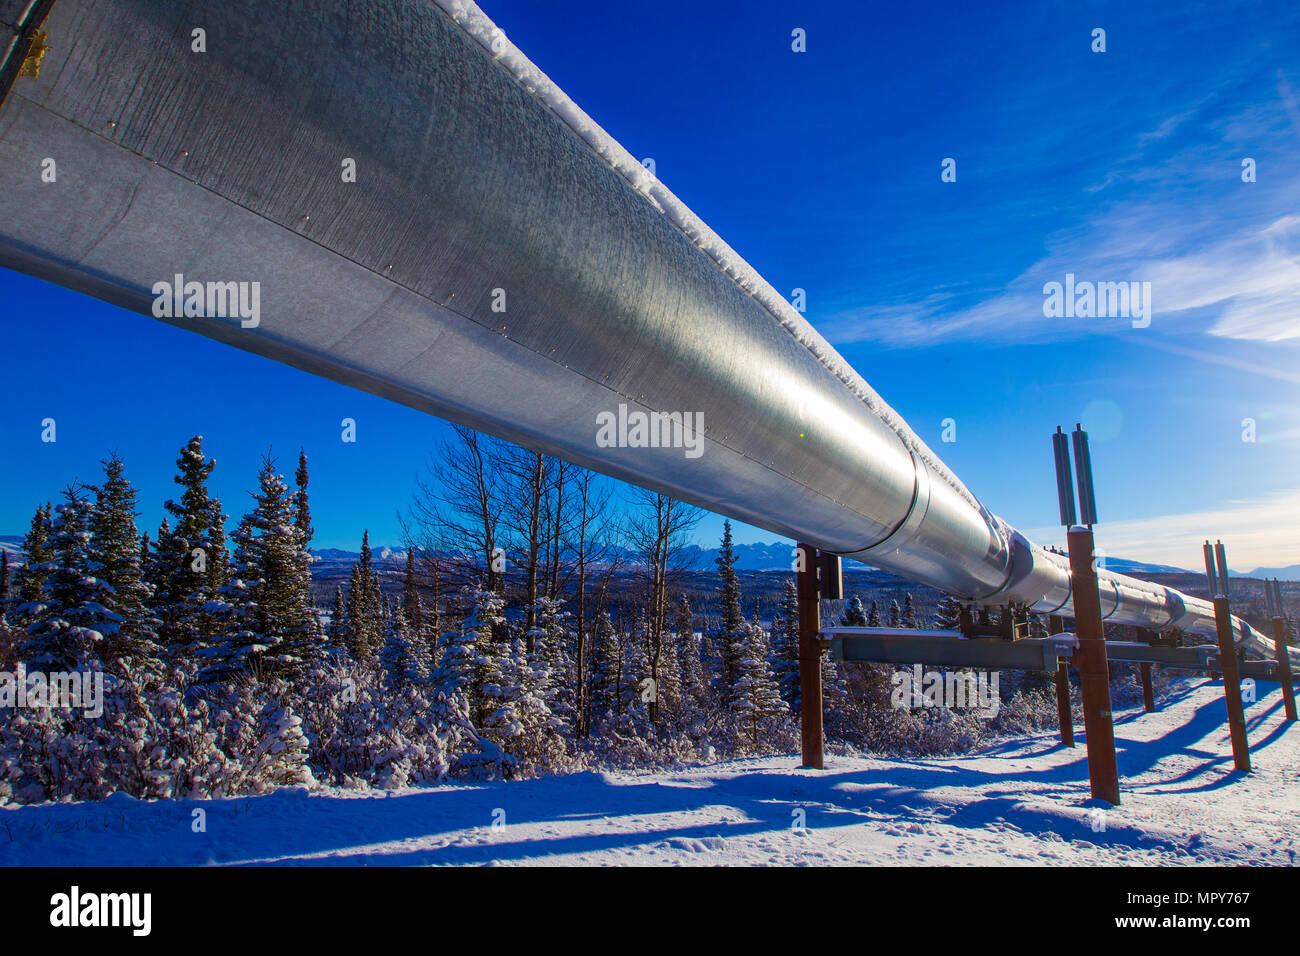 Trans-Alaskan Pipeline over field at forest against sky during winter Stock Photo